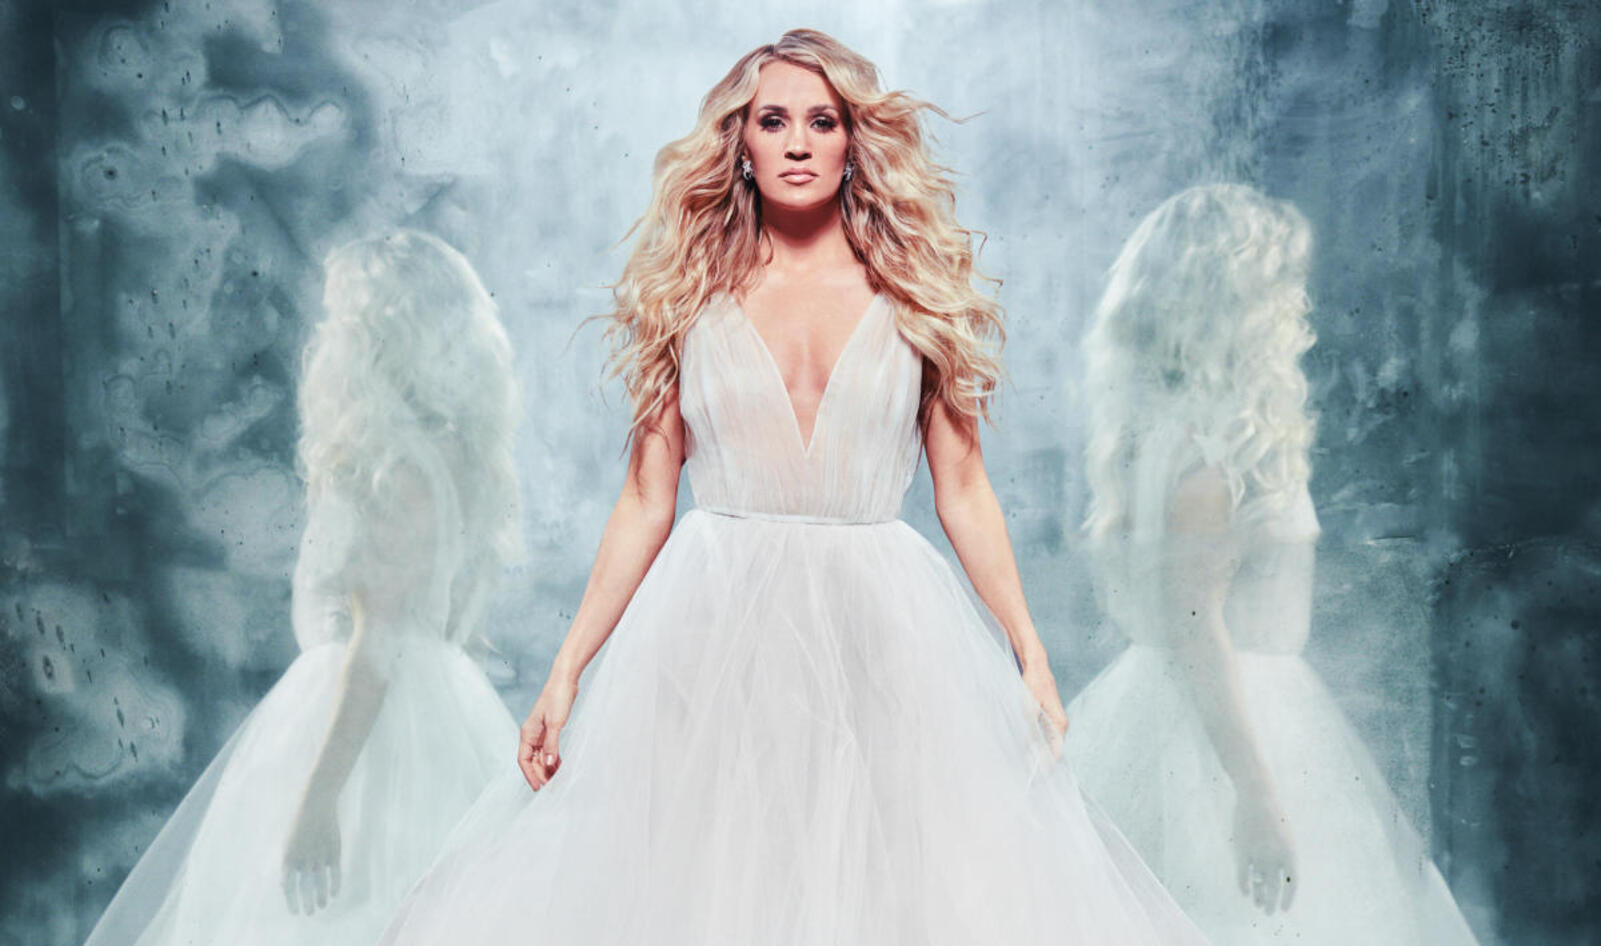 What Is "Ugly" Lasagna? Carrie Underwood’s Secret to Looking Amazing